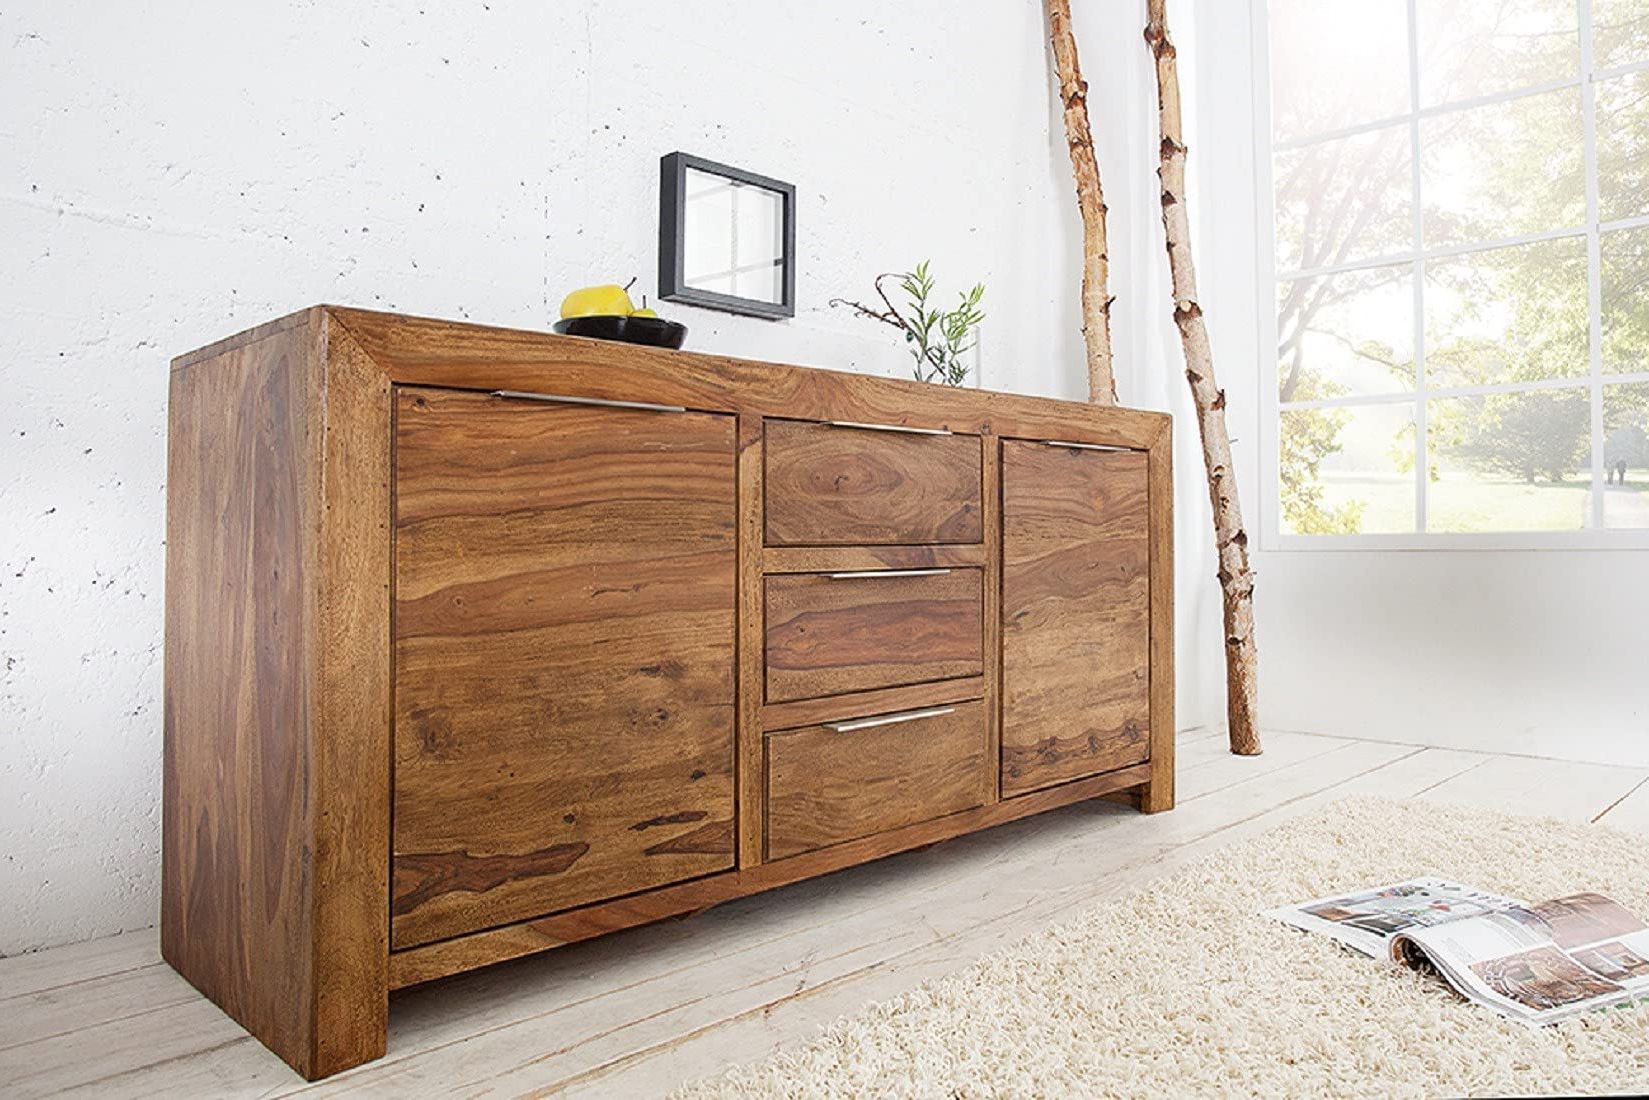 Wood Wall Wooden Sideboard Cabinet For Living Room (View 5 of 10)